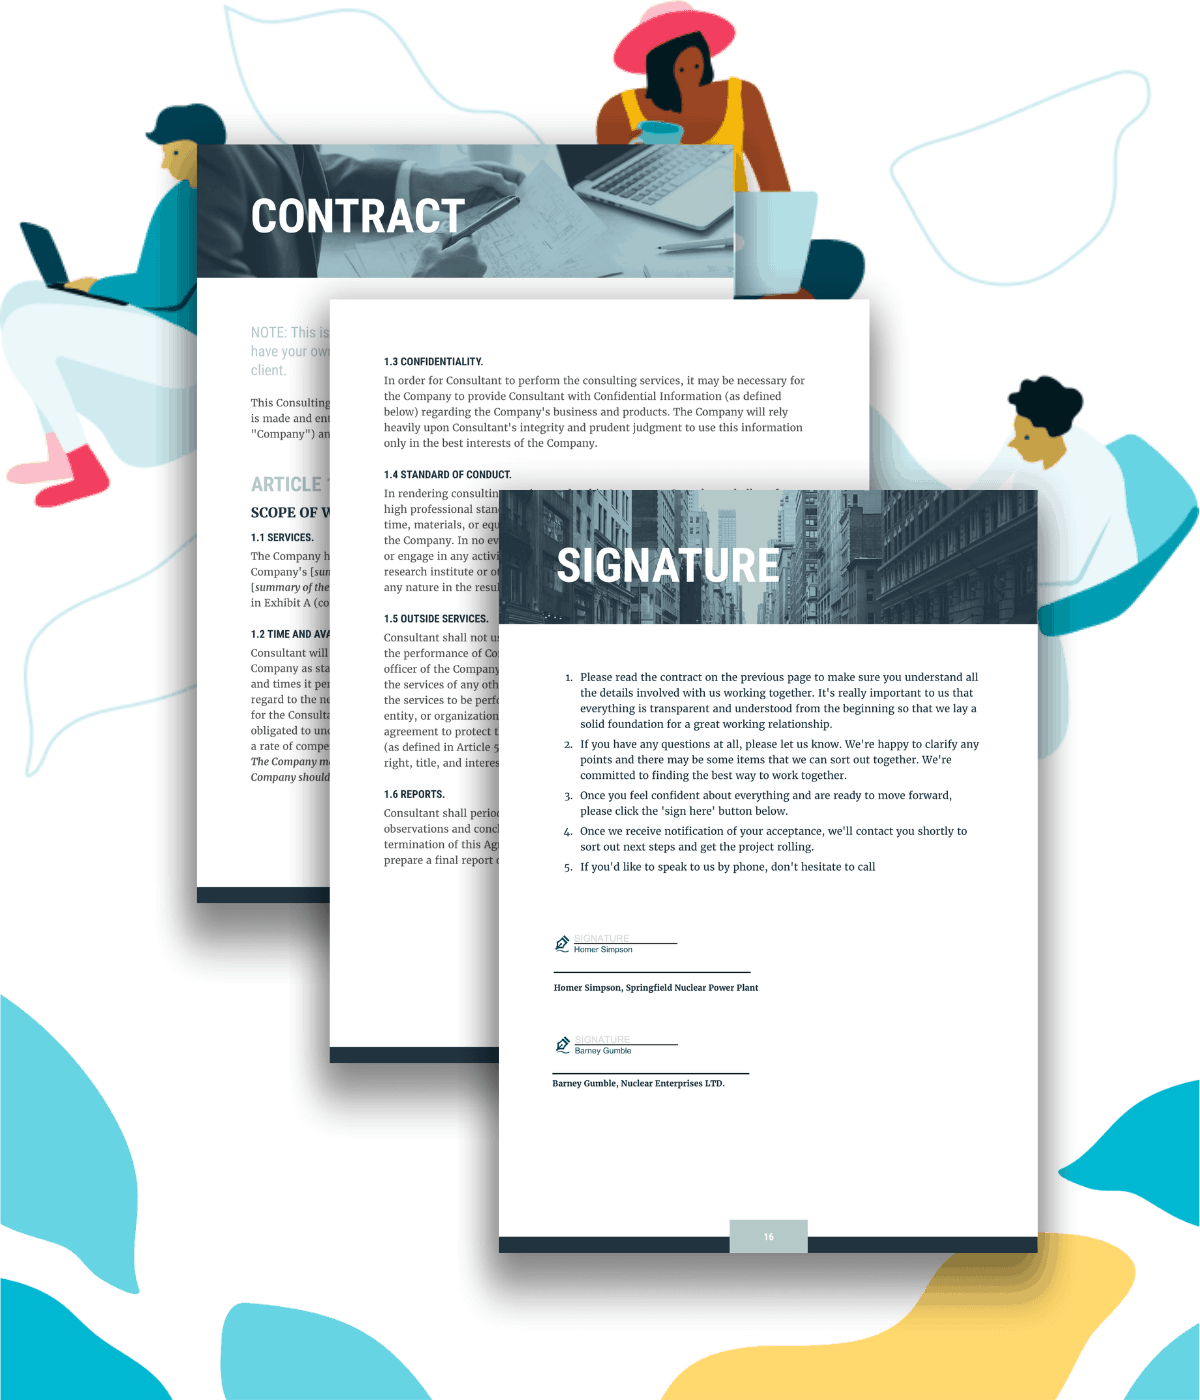 Example contract section and signature page for clients to esign a consulting proposal.